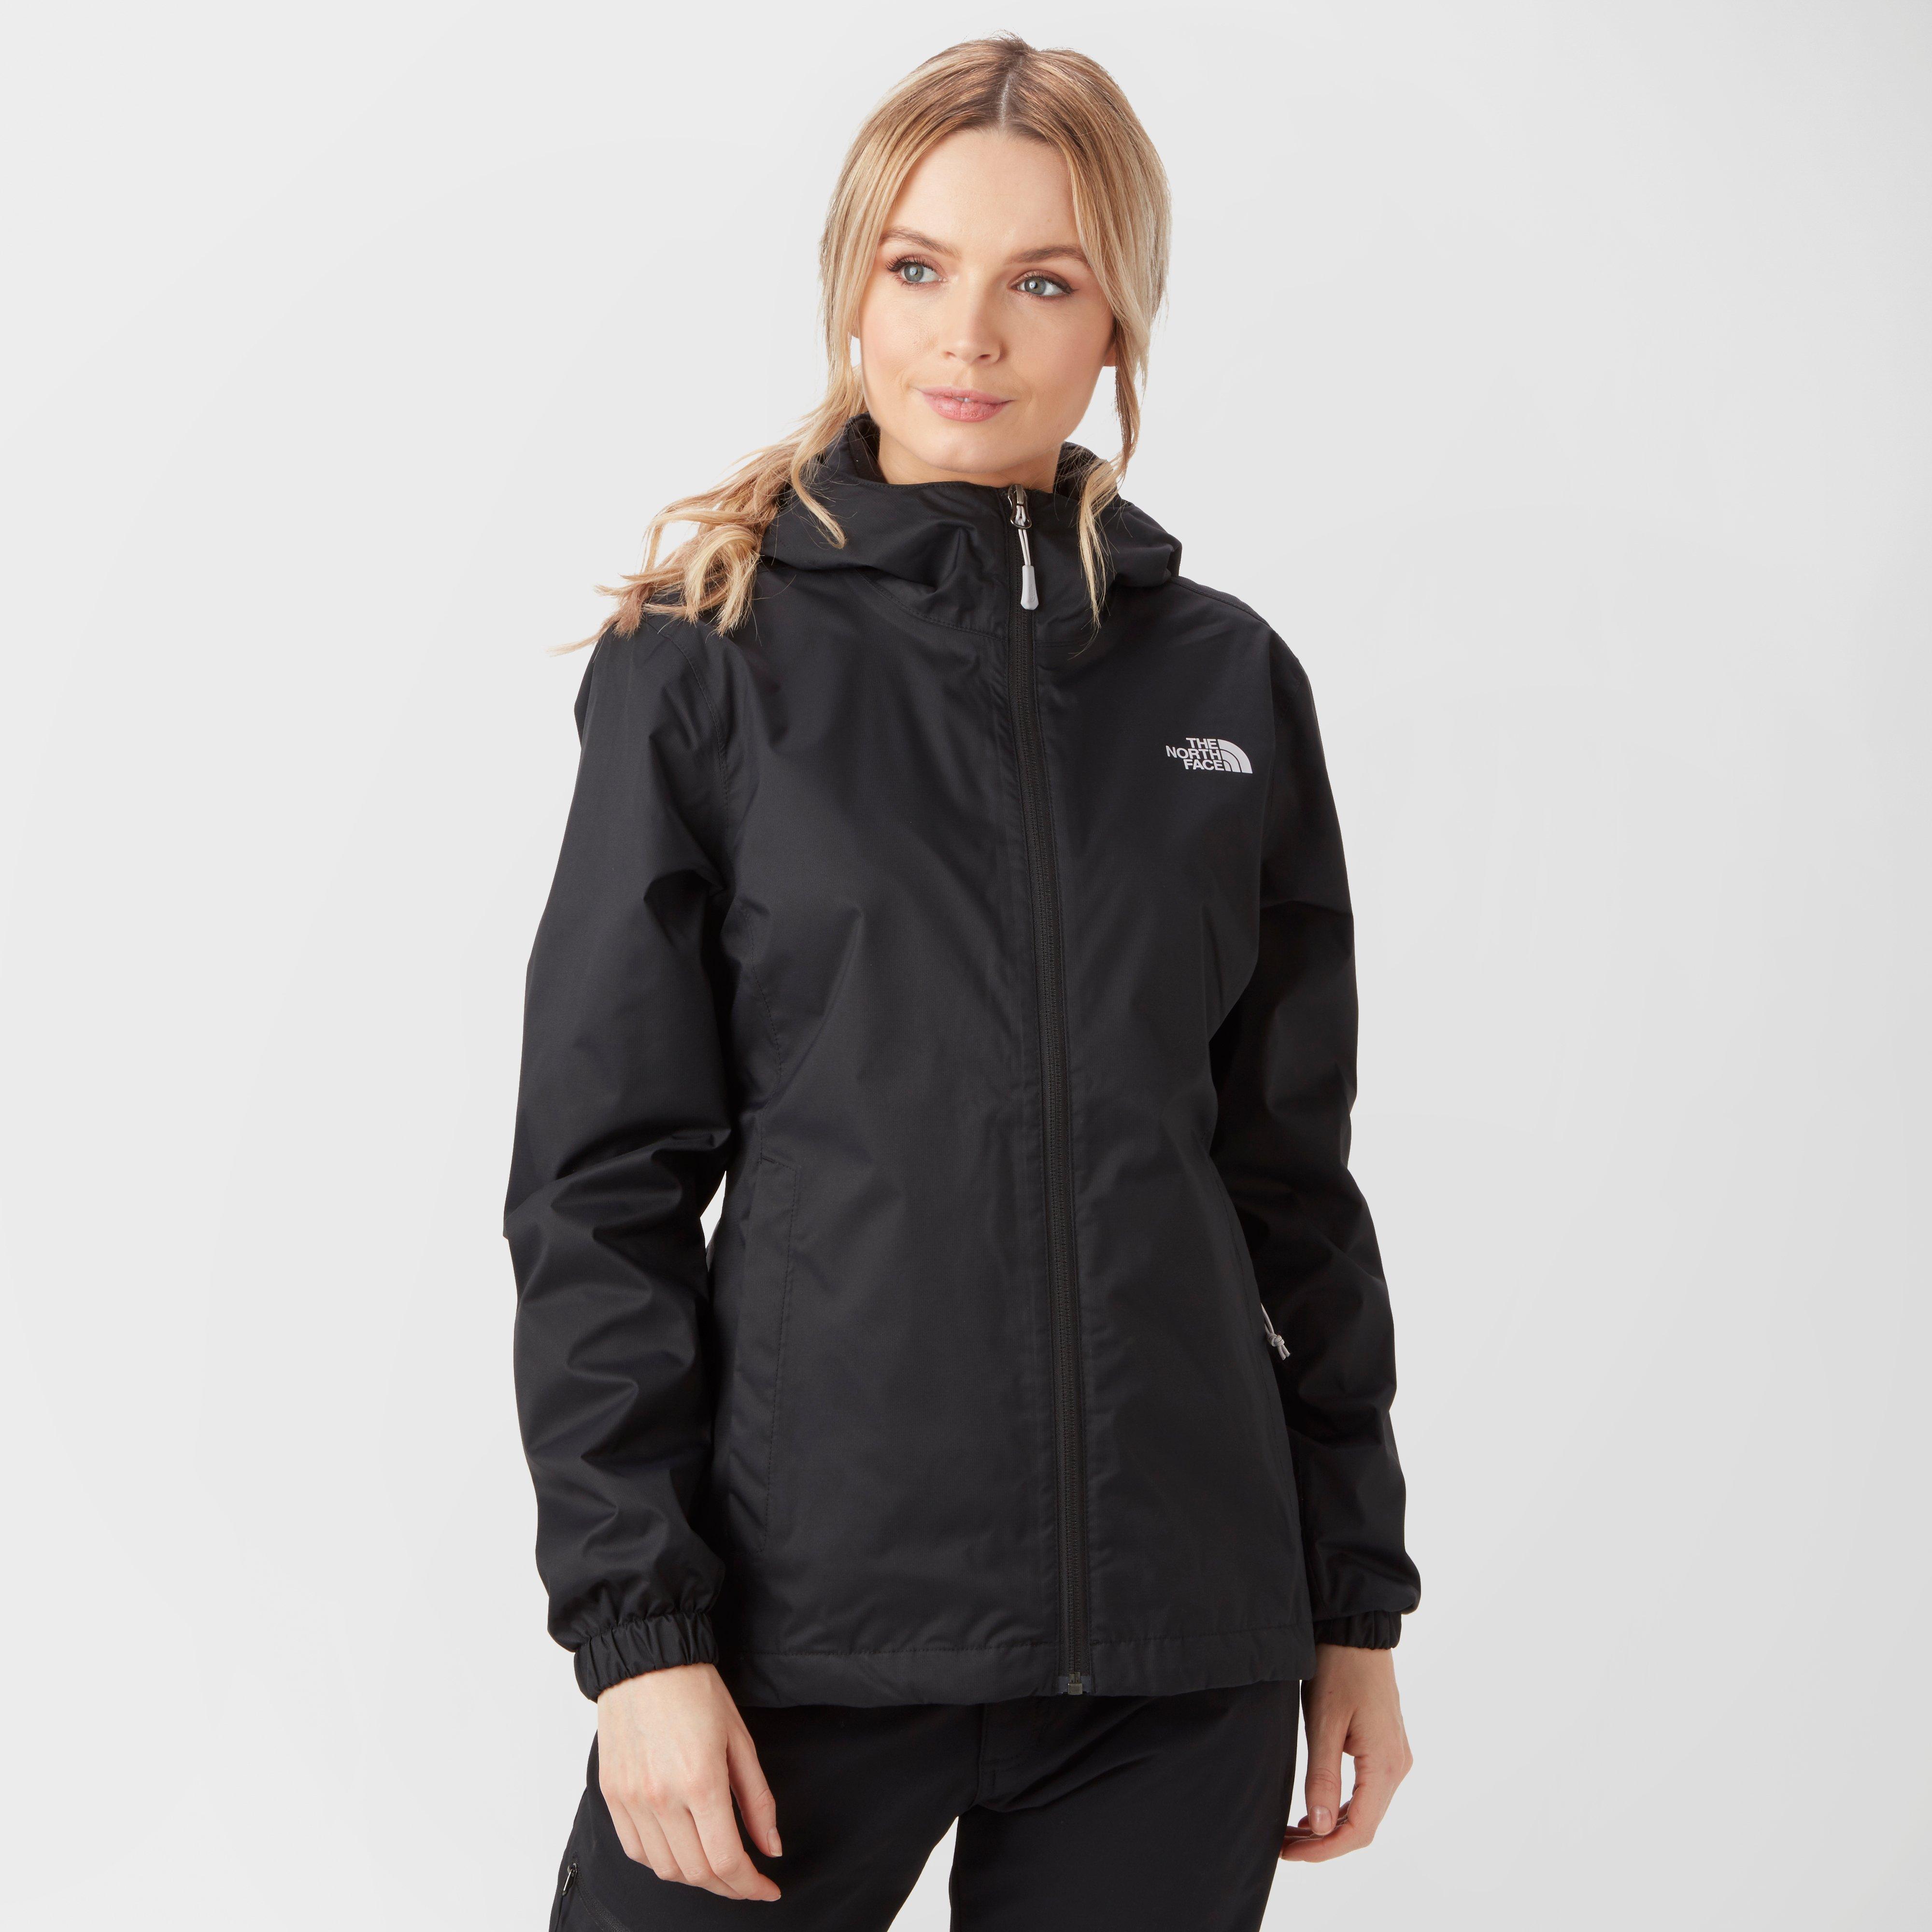 north face women's quest jacket review 